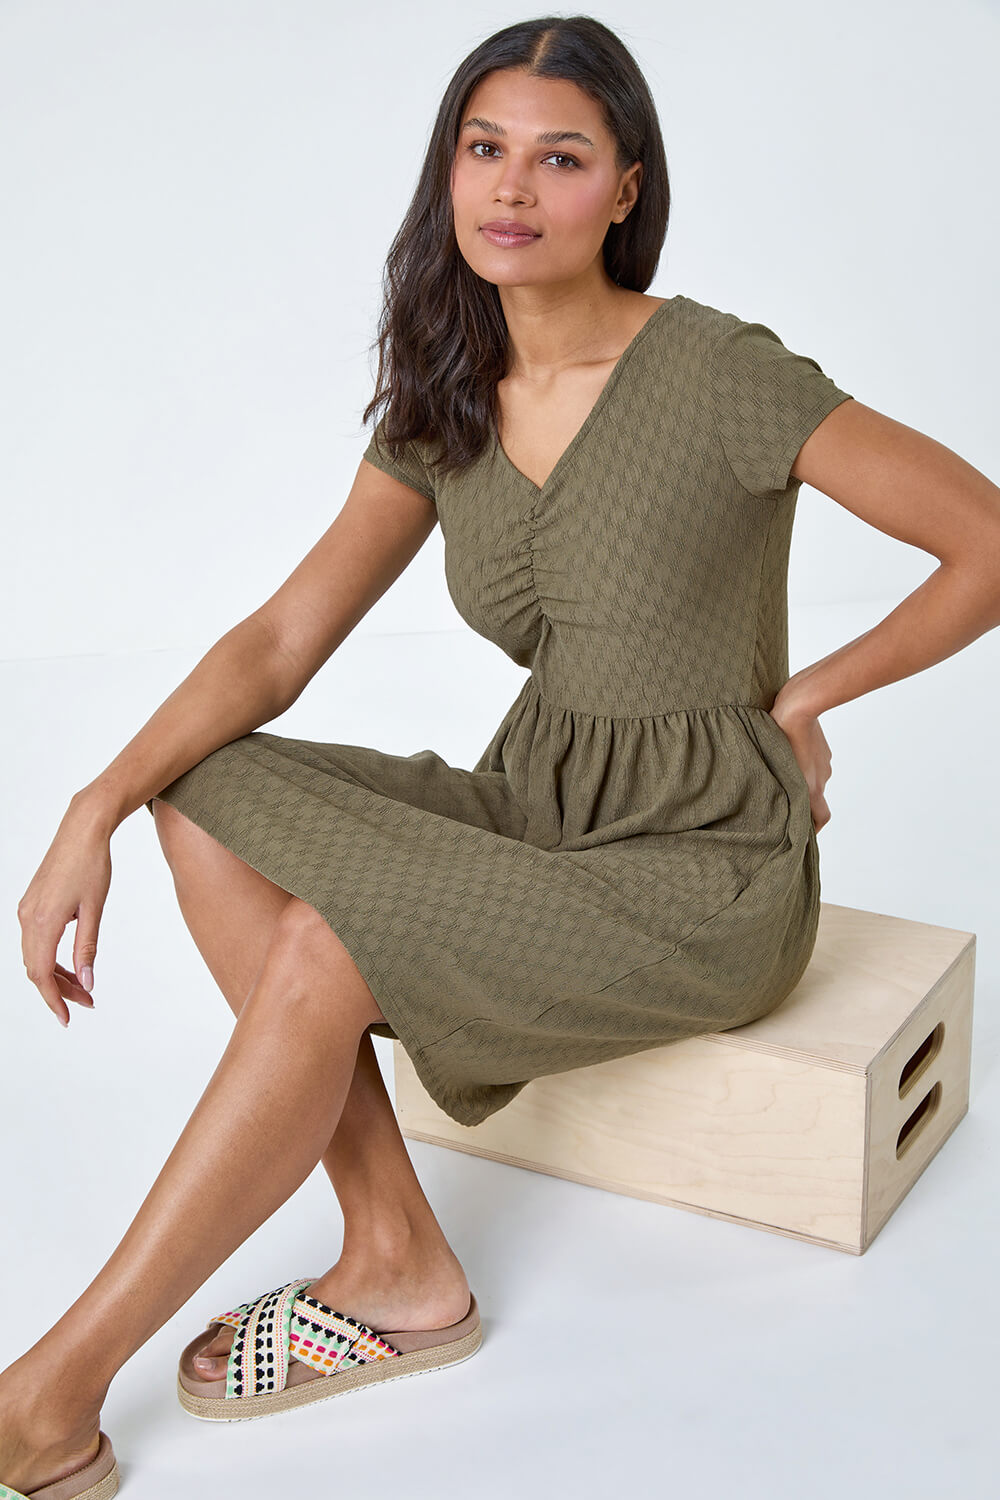 Textured Ruched Stretch Jersey Dress